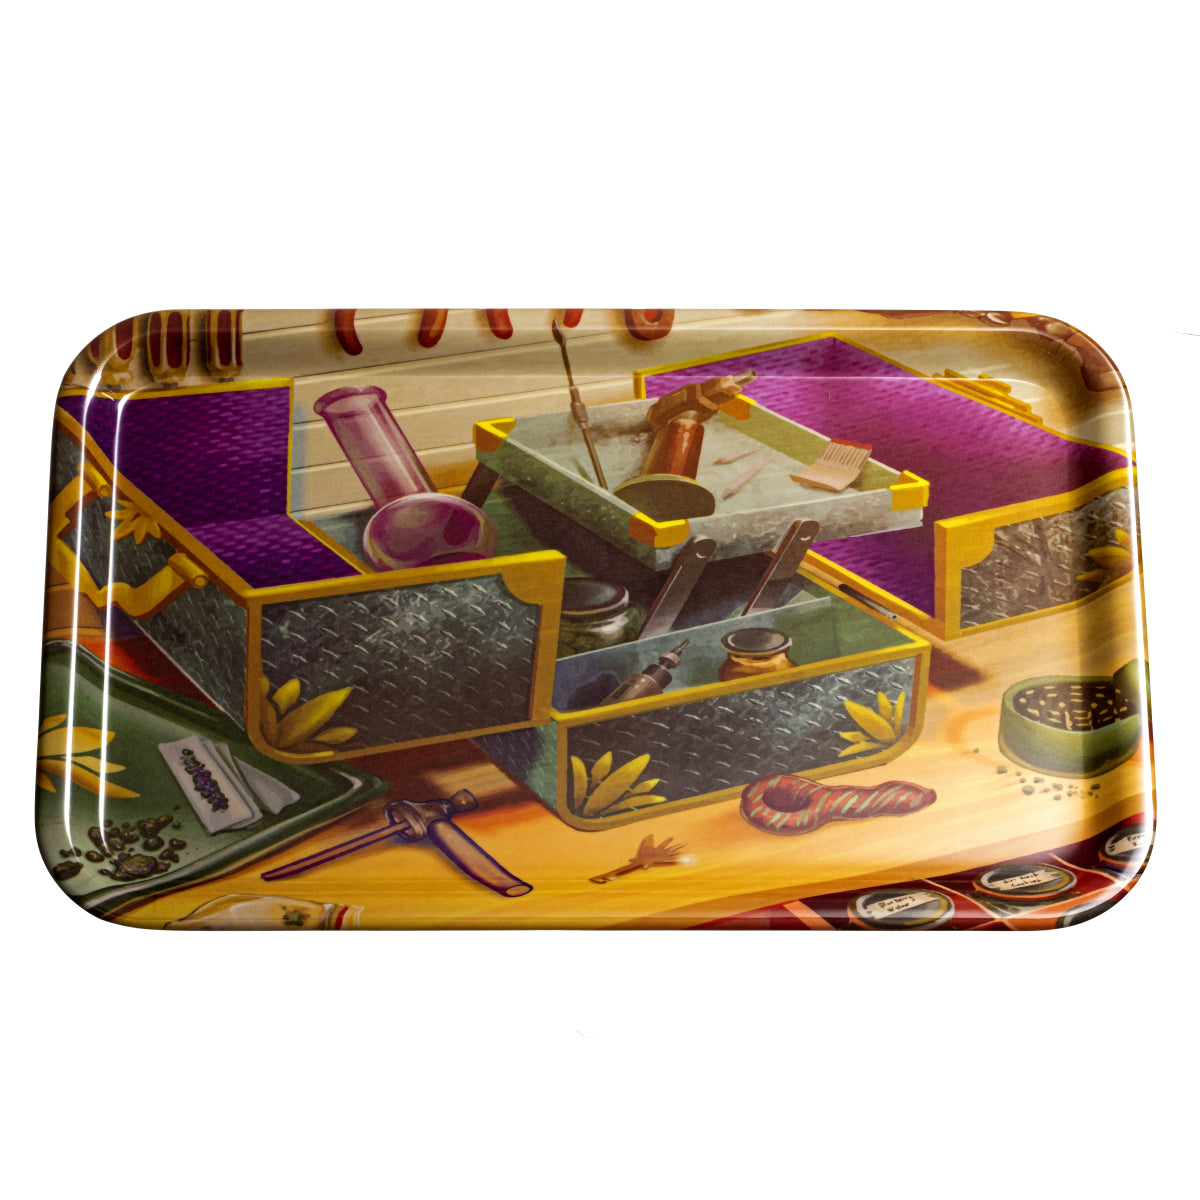 Rollin Budz Toolbox Rolling Tray - (1 Count)